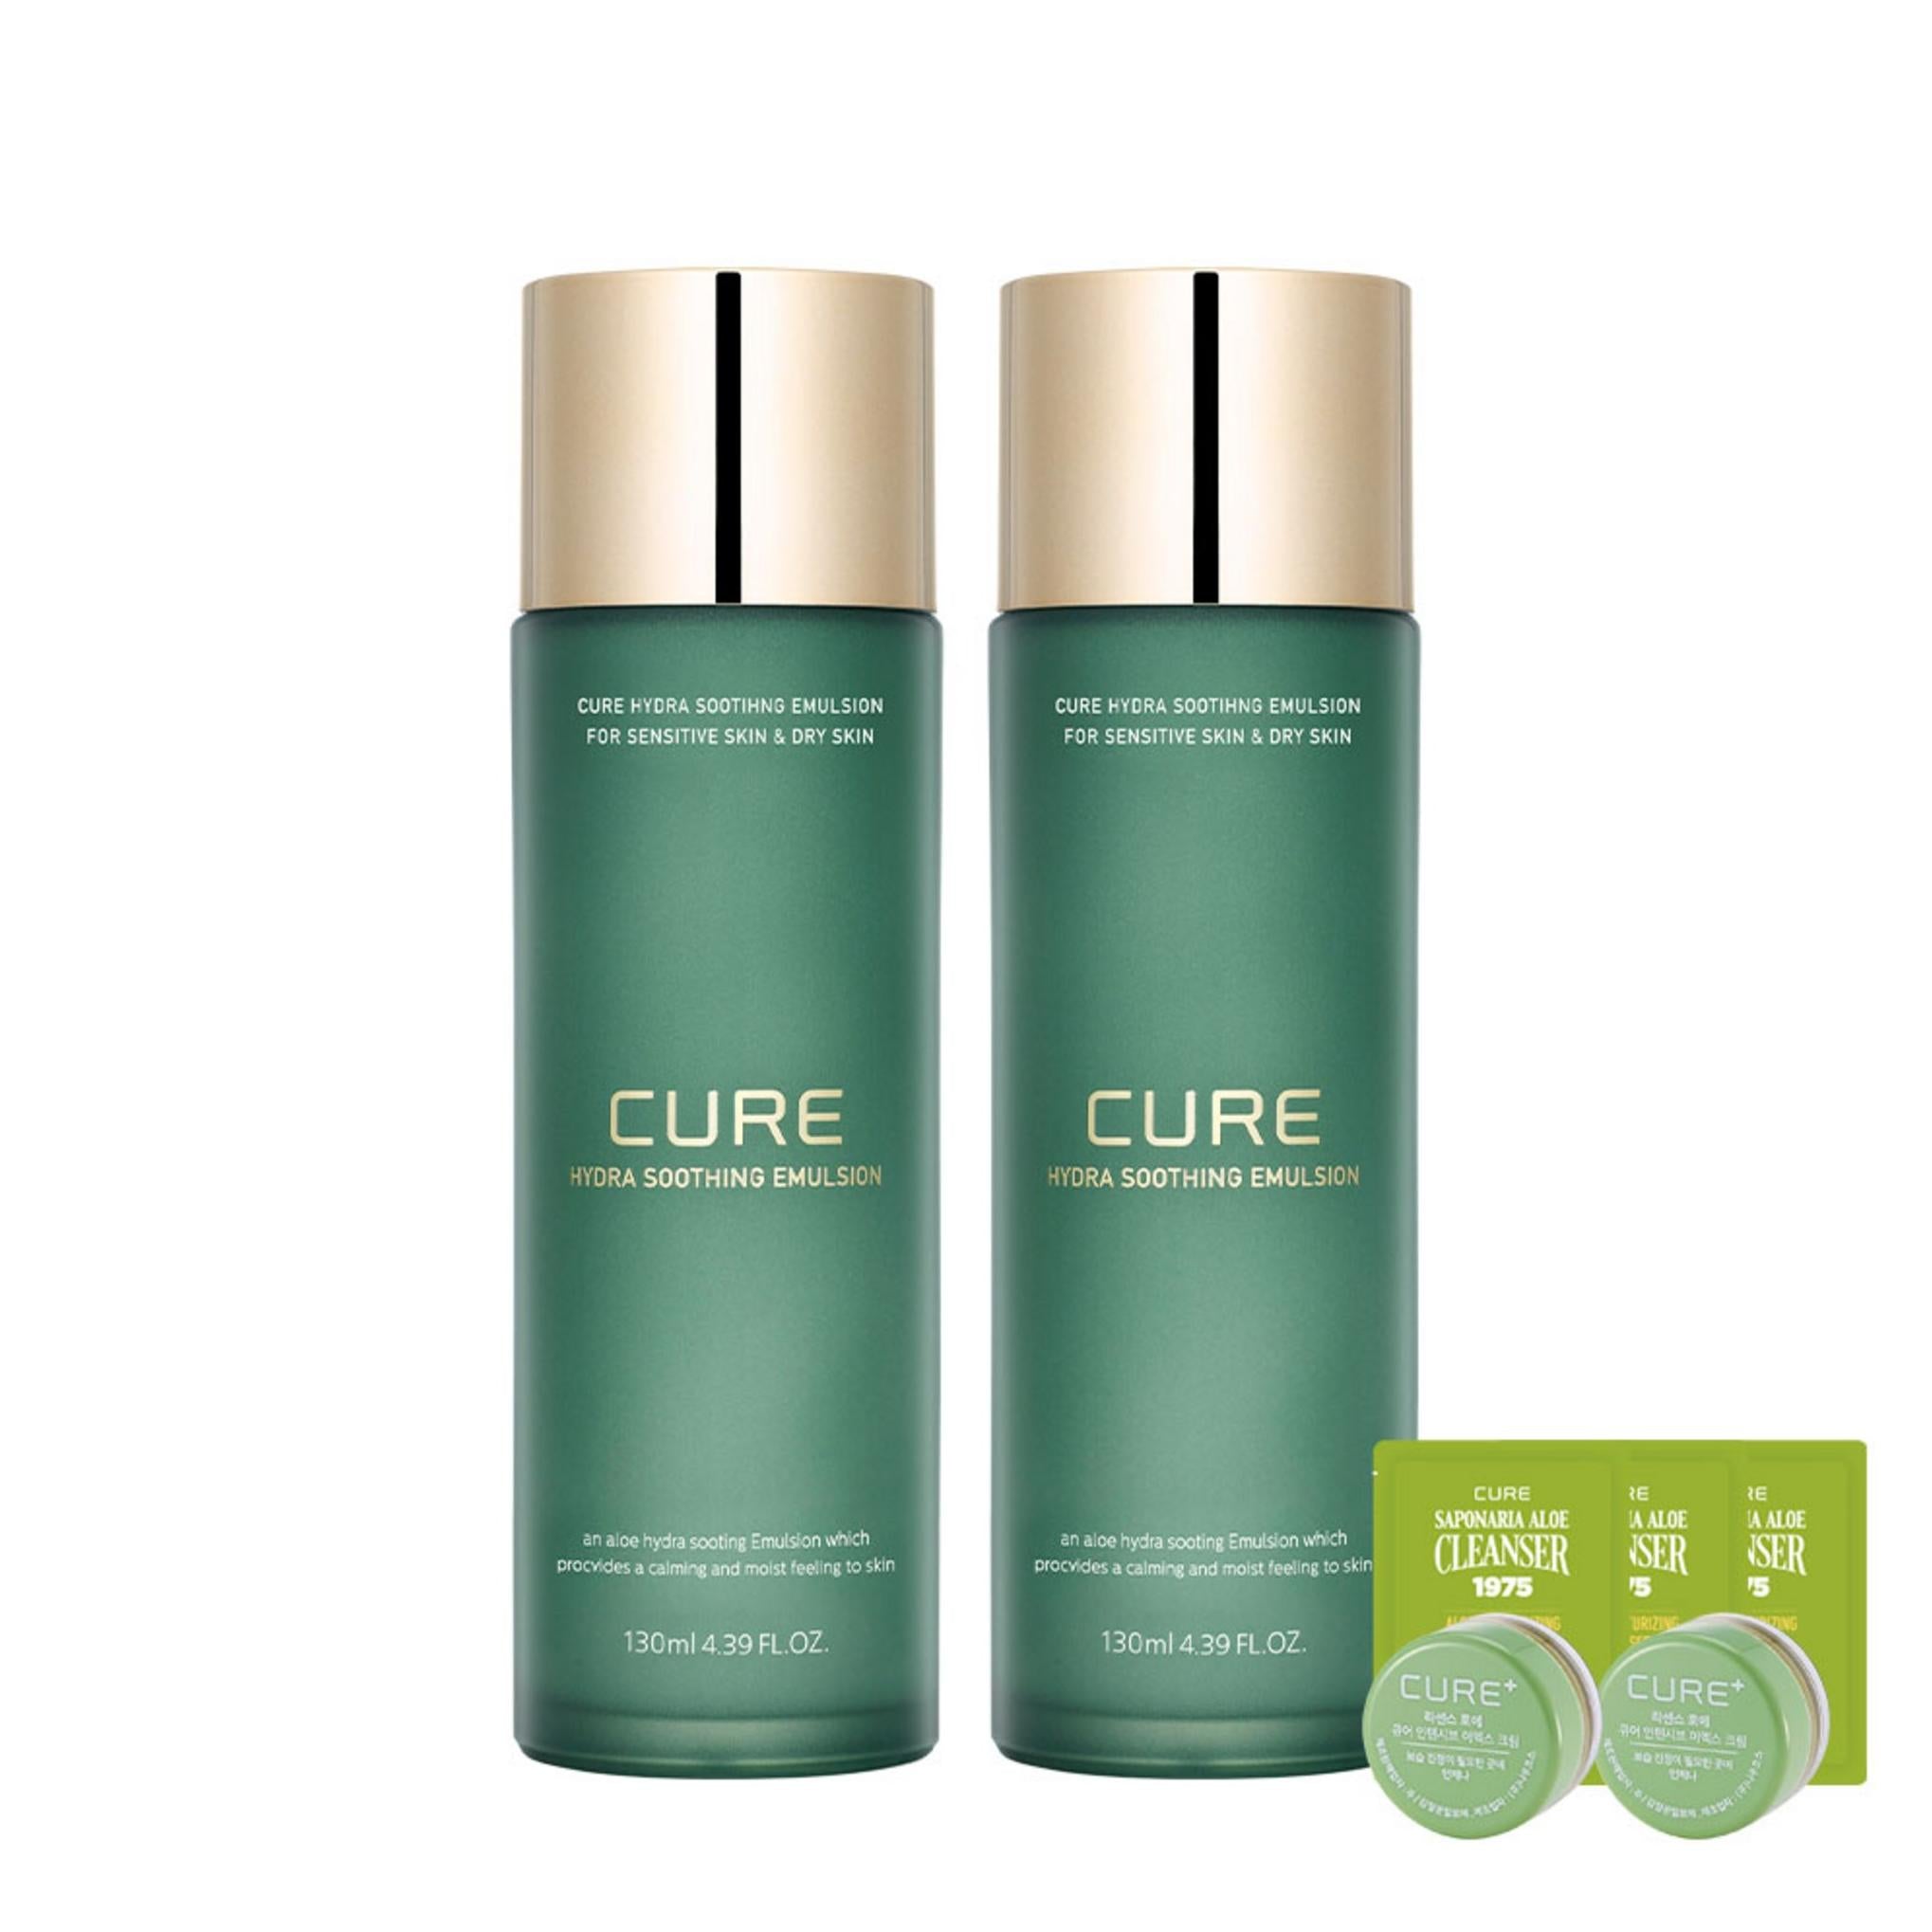 Kim Jung Moon Aloe Cure Hydra Soothing Emulsion 130ml x 2p